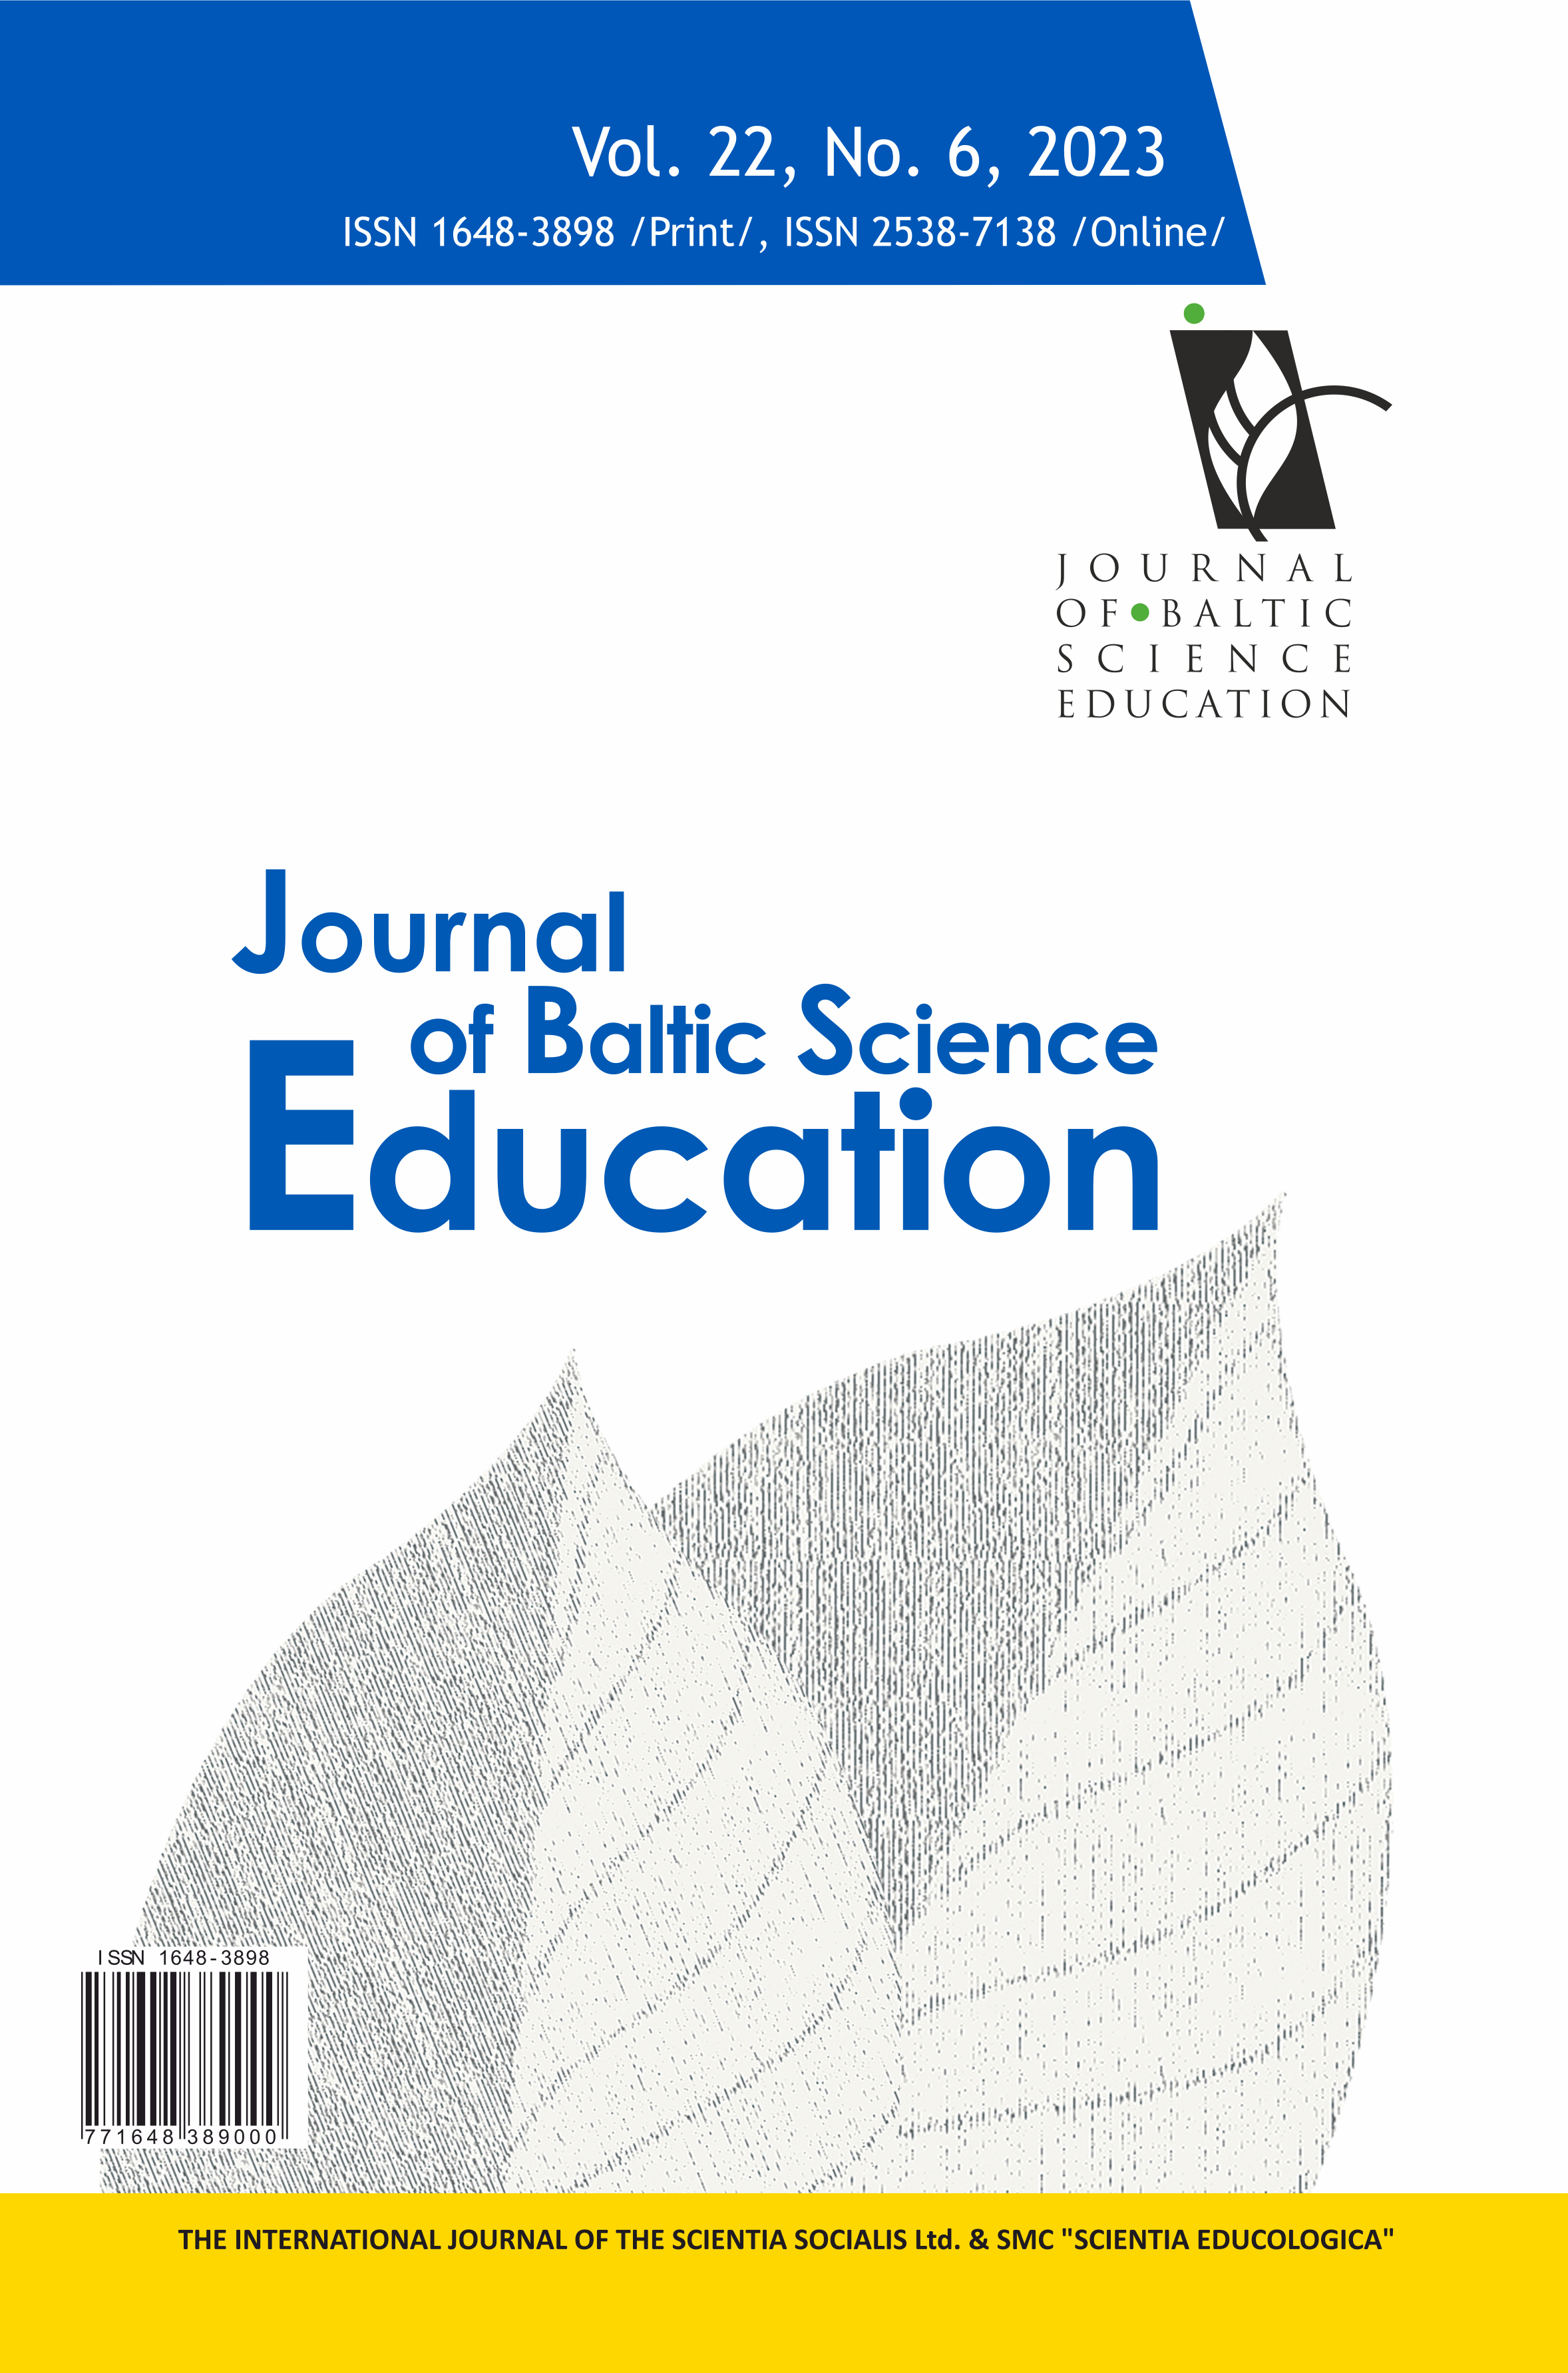 ABSENTEEISM AND STUDENTS' ATTITUDES TOWARD SCIENCE: IMPACT ON EXAM RESULTS AMONG EIGHTH-GRADE STUDENTS IN MALAYSIA AND SINGAPORE